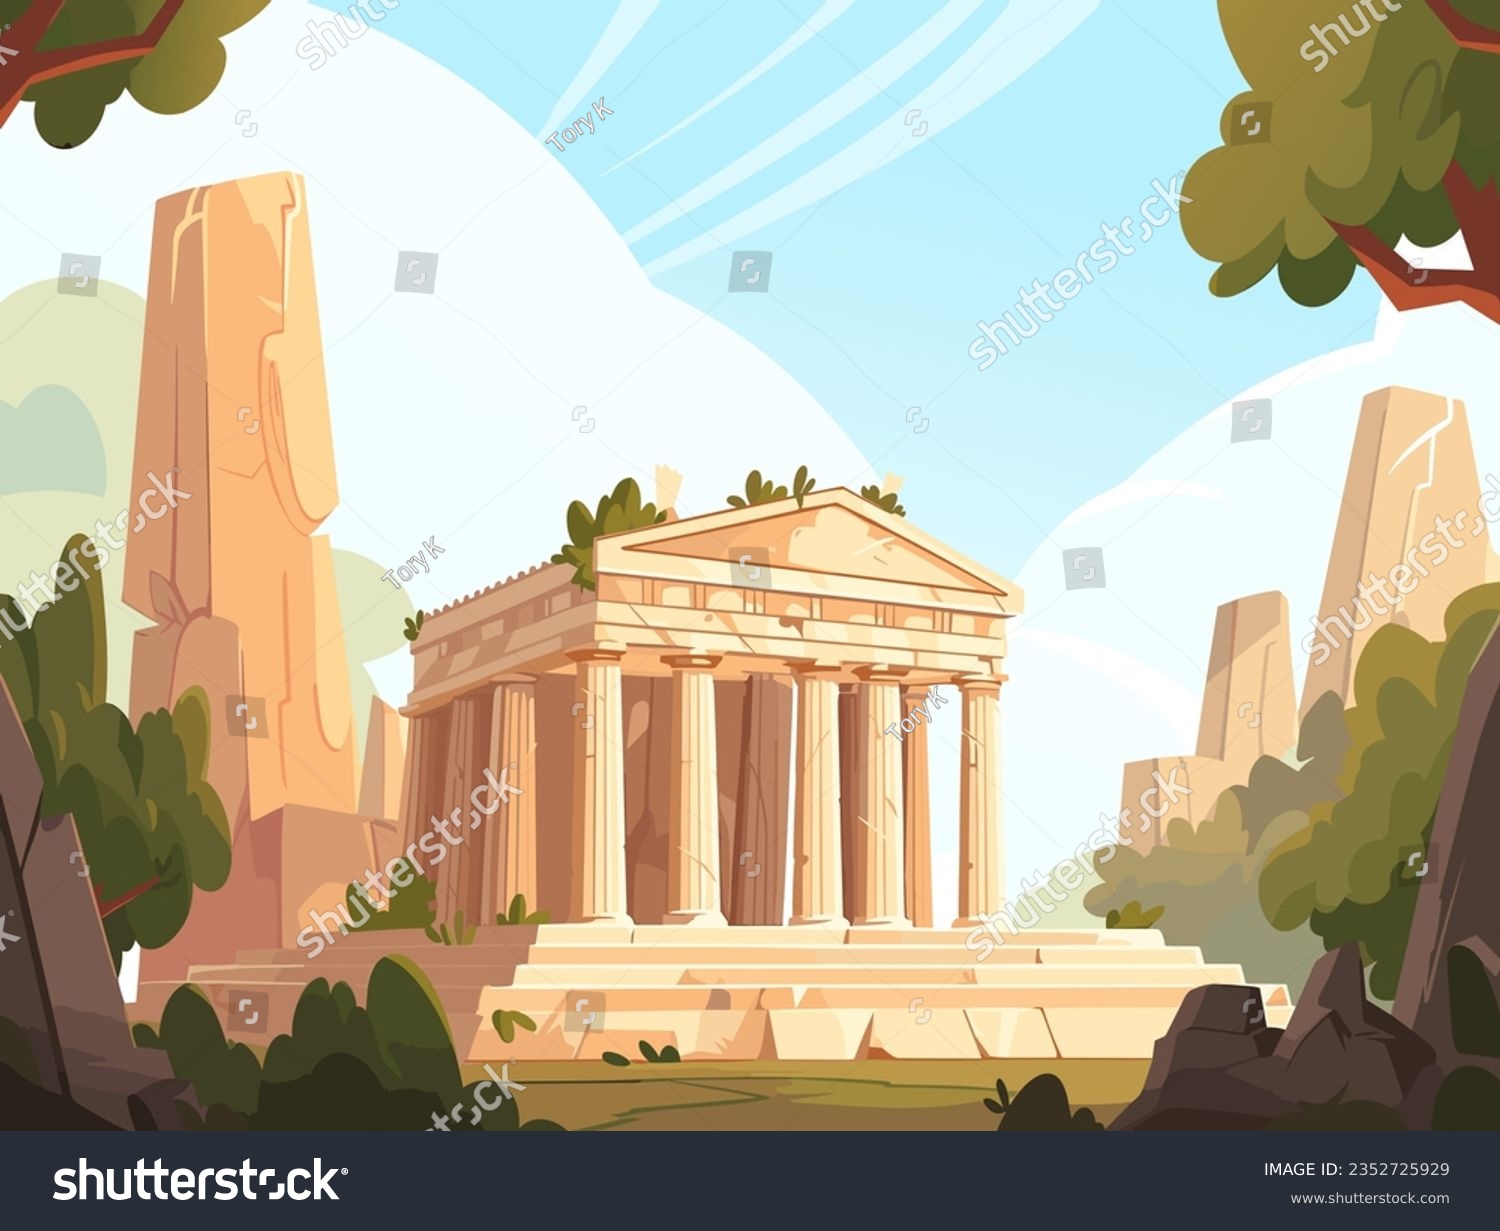 SVG of The temple of ancient greek gods and goddess in the mountains and trees background, in the cartoon style, vector and simple, playful stylized shapes, colorful and bright style for kids, vector art svg